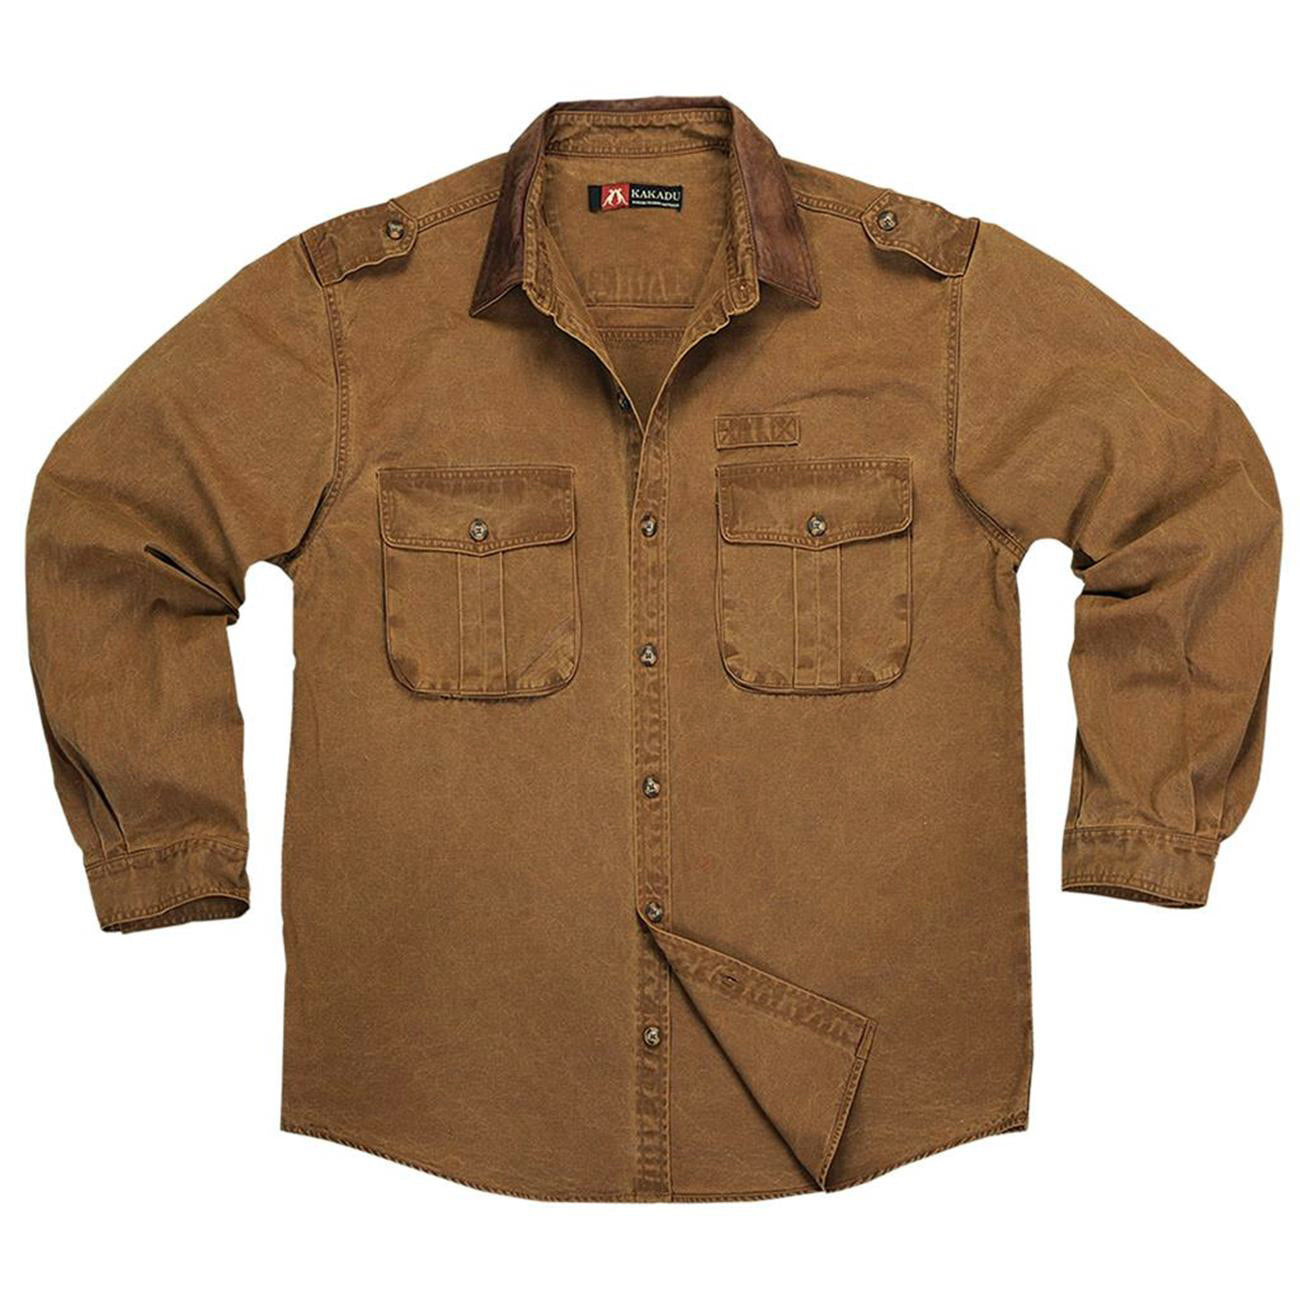 Robusty outdoor men's shirt with leather collar and button bar